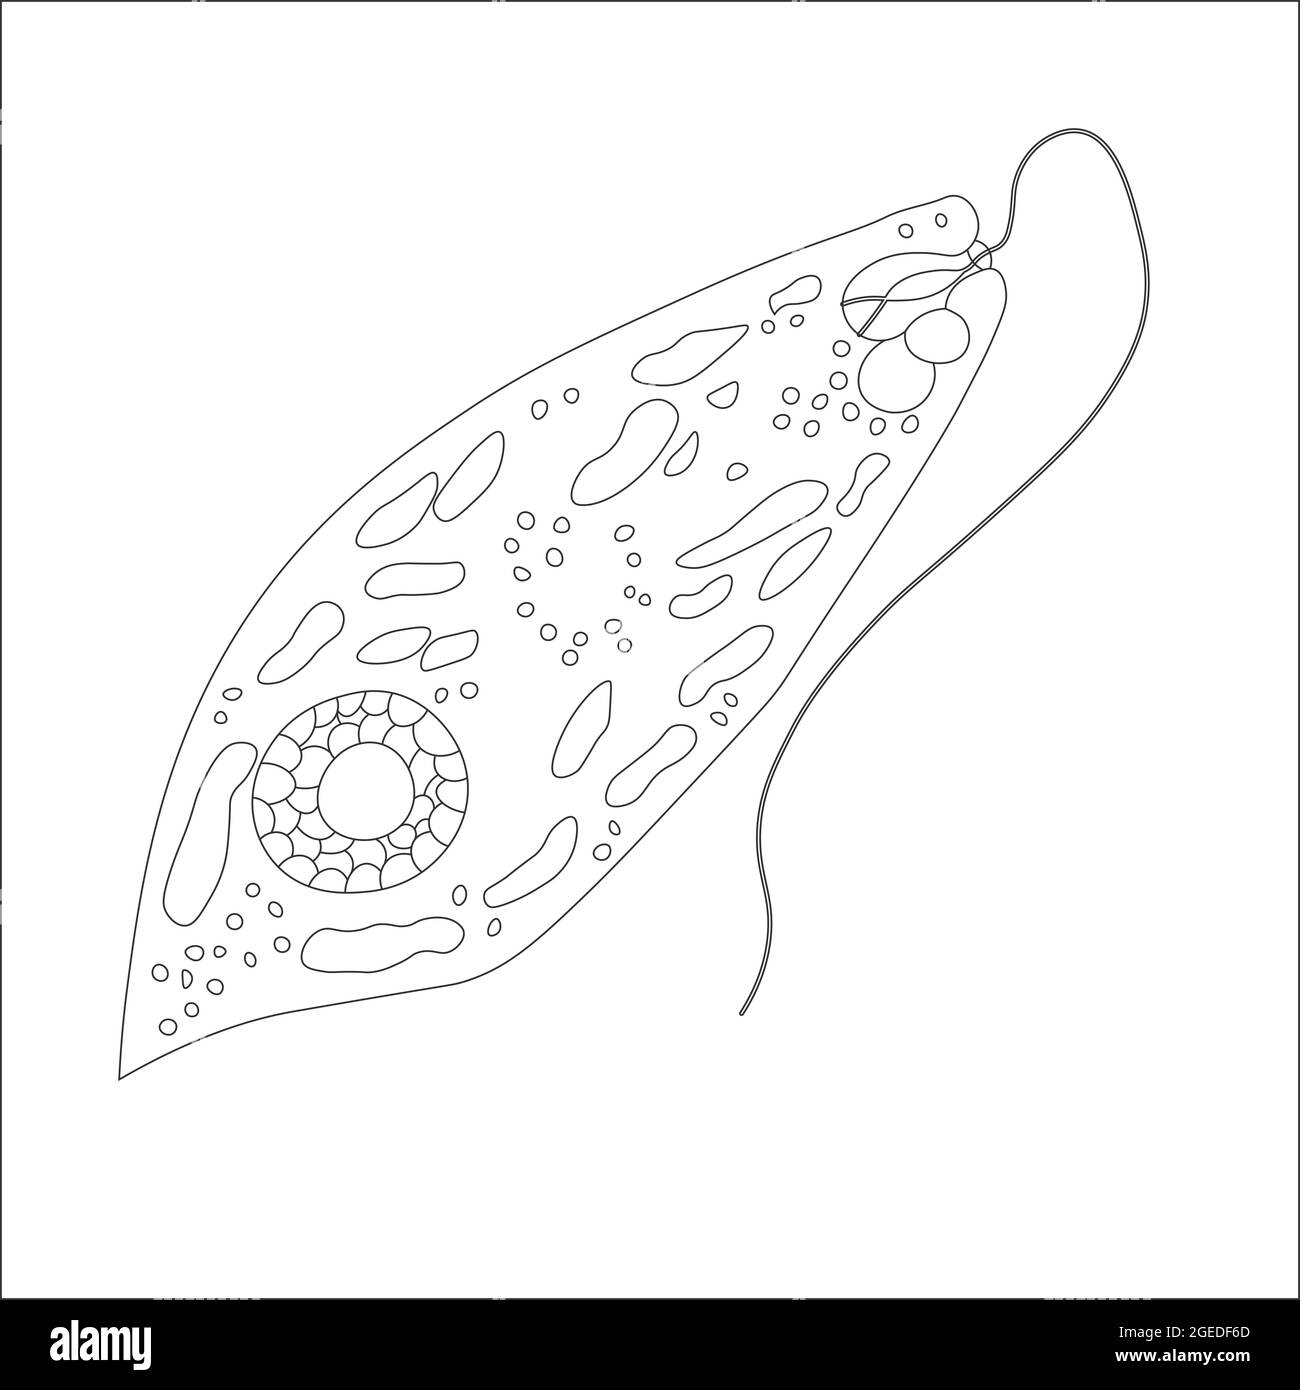 Contour euglena green. Vector illustration of a microorganism. Black and white contour illustration. Stock Photo